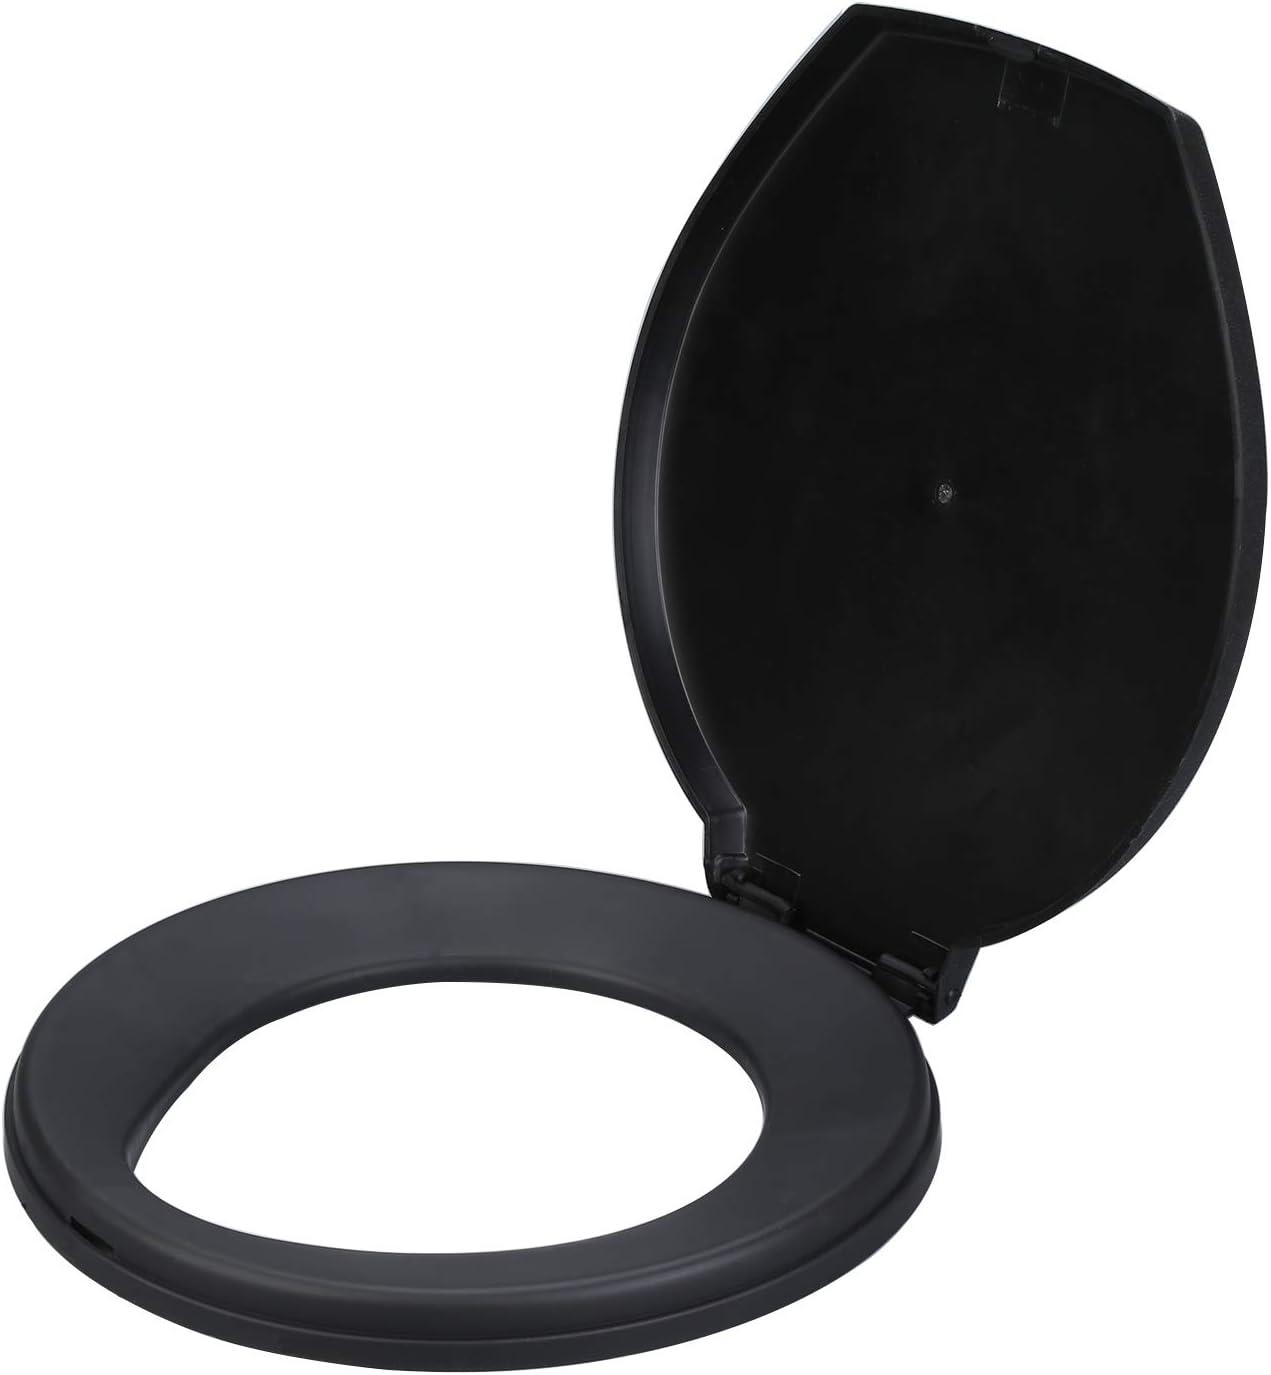 Emergency Sanitation Portable Bucket Toilet with Snap-On Lid Seat